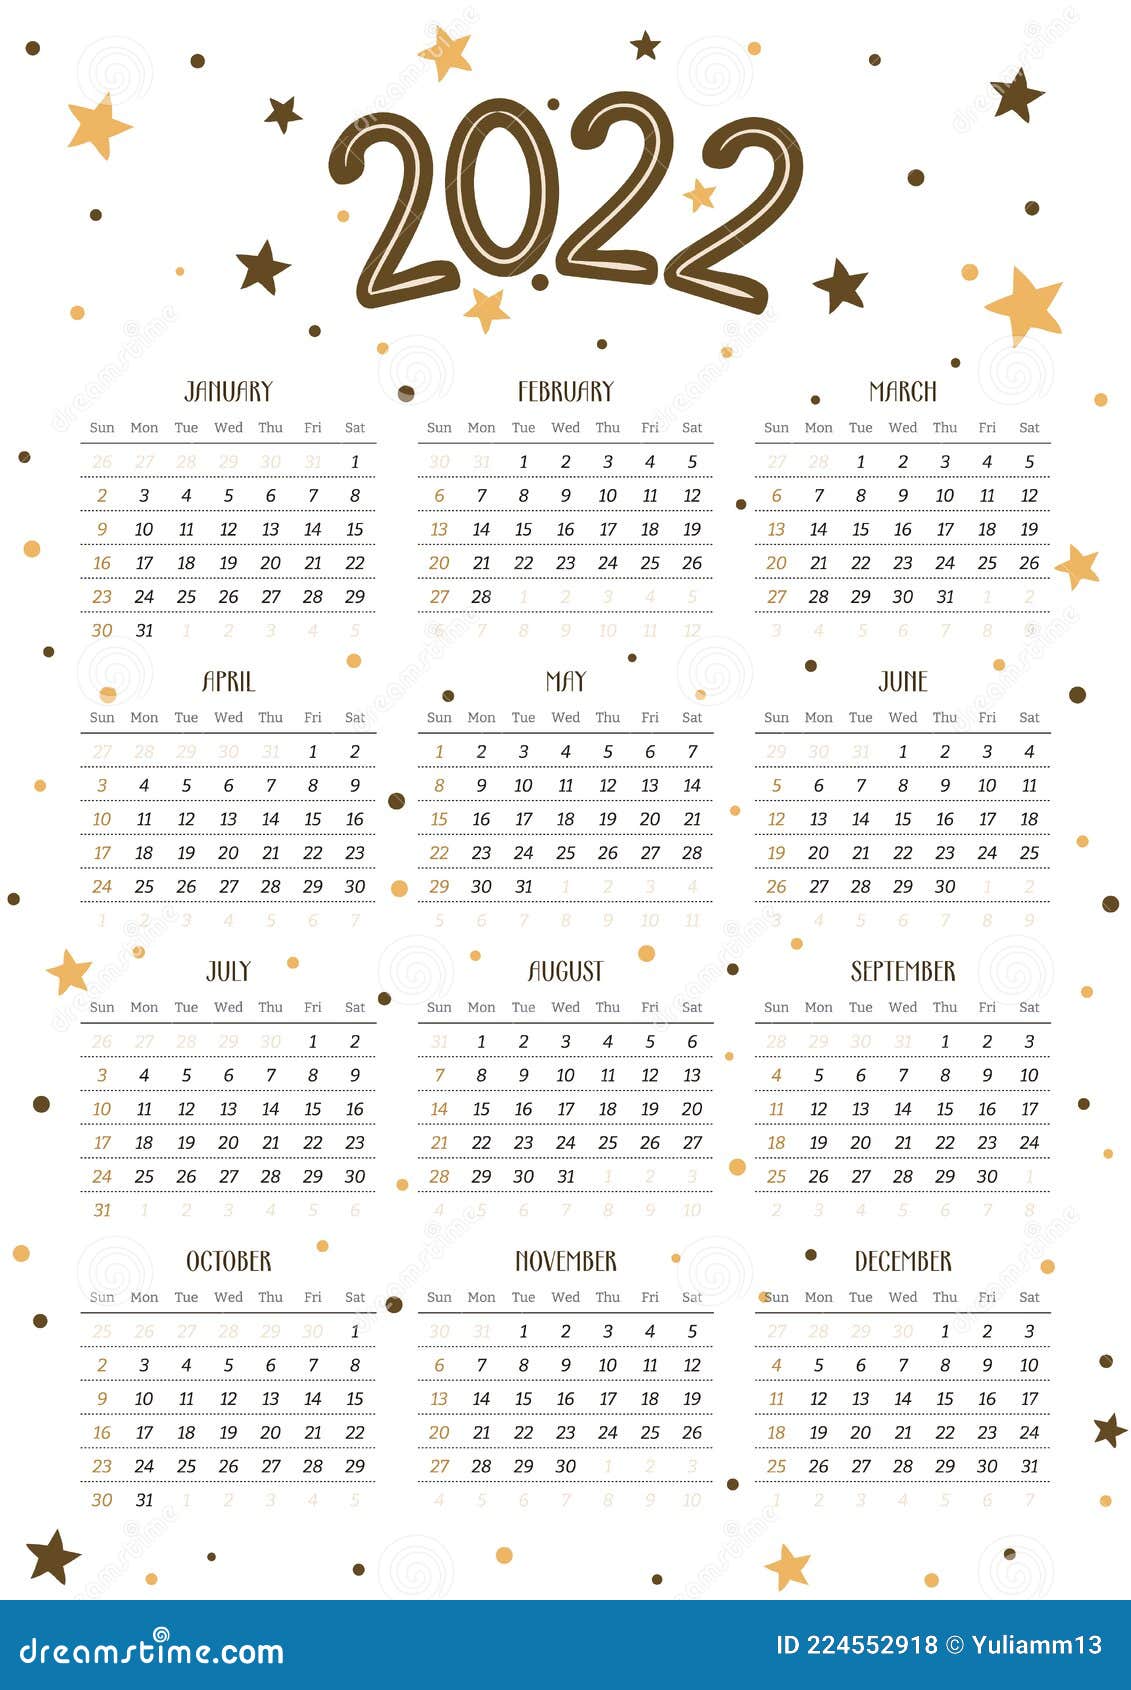 Portrait Calendar 2022 2022 Calendar Template In Portrait Orientation With Stars And Dots Stock  Vector - Illustration Of Dots, June: 224552918